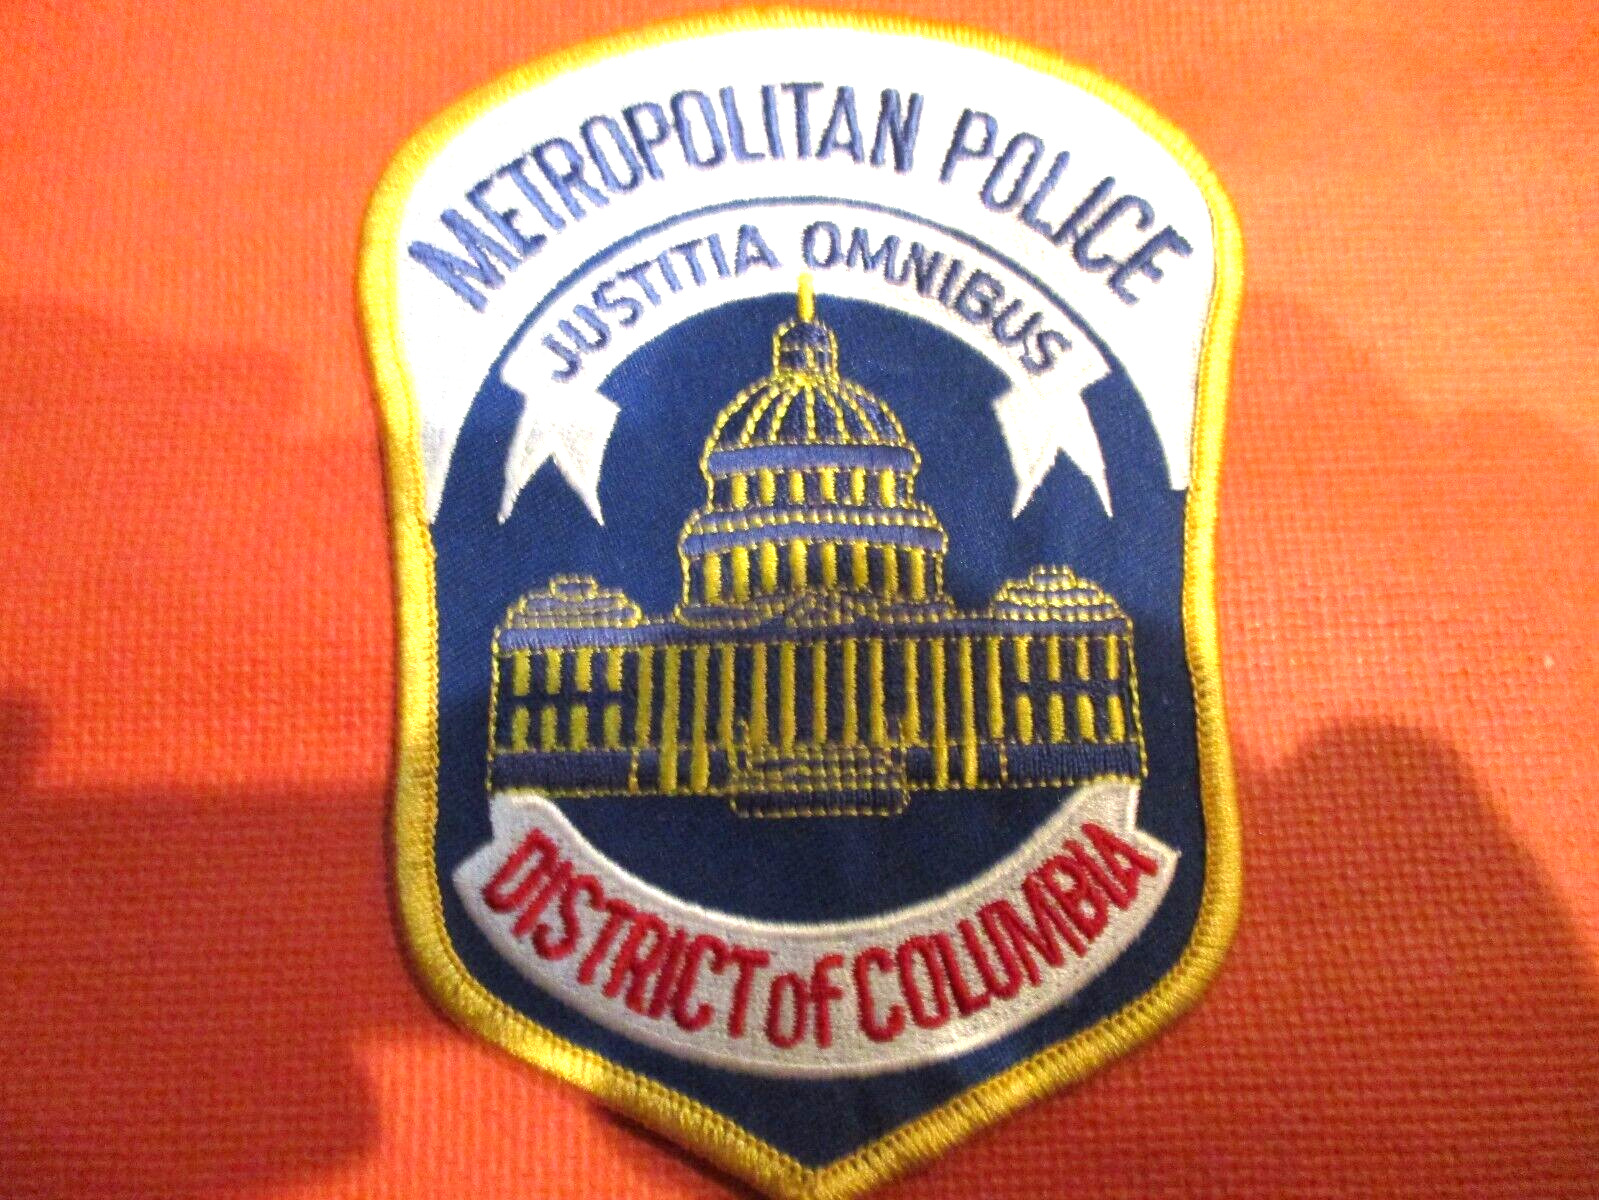 Collectible Washington D.C. Police Patch,New